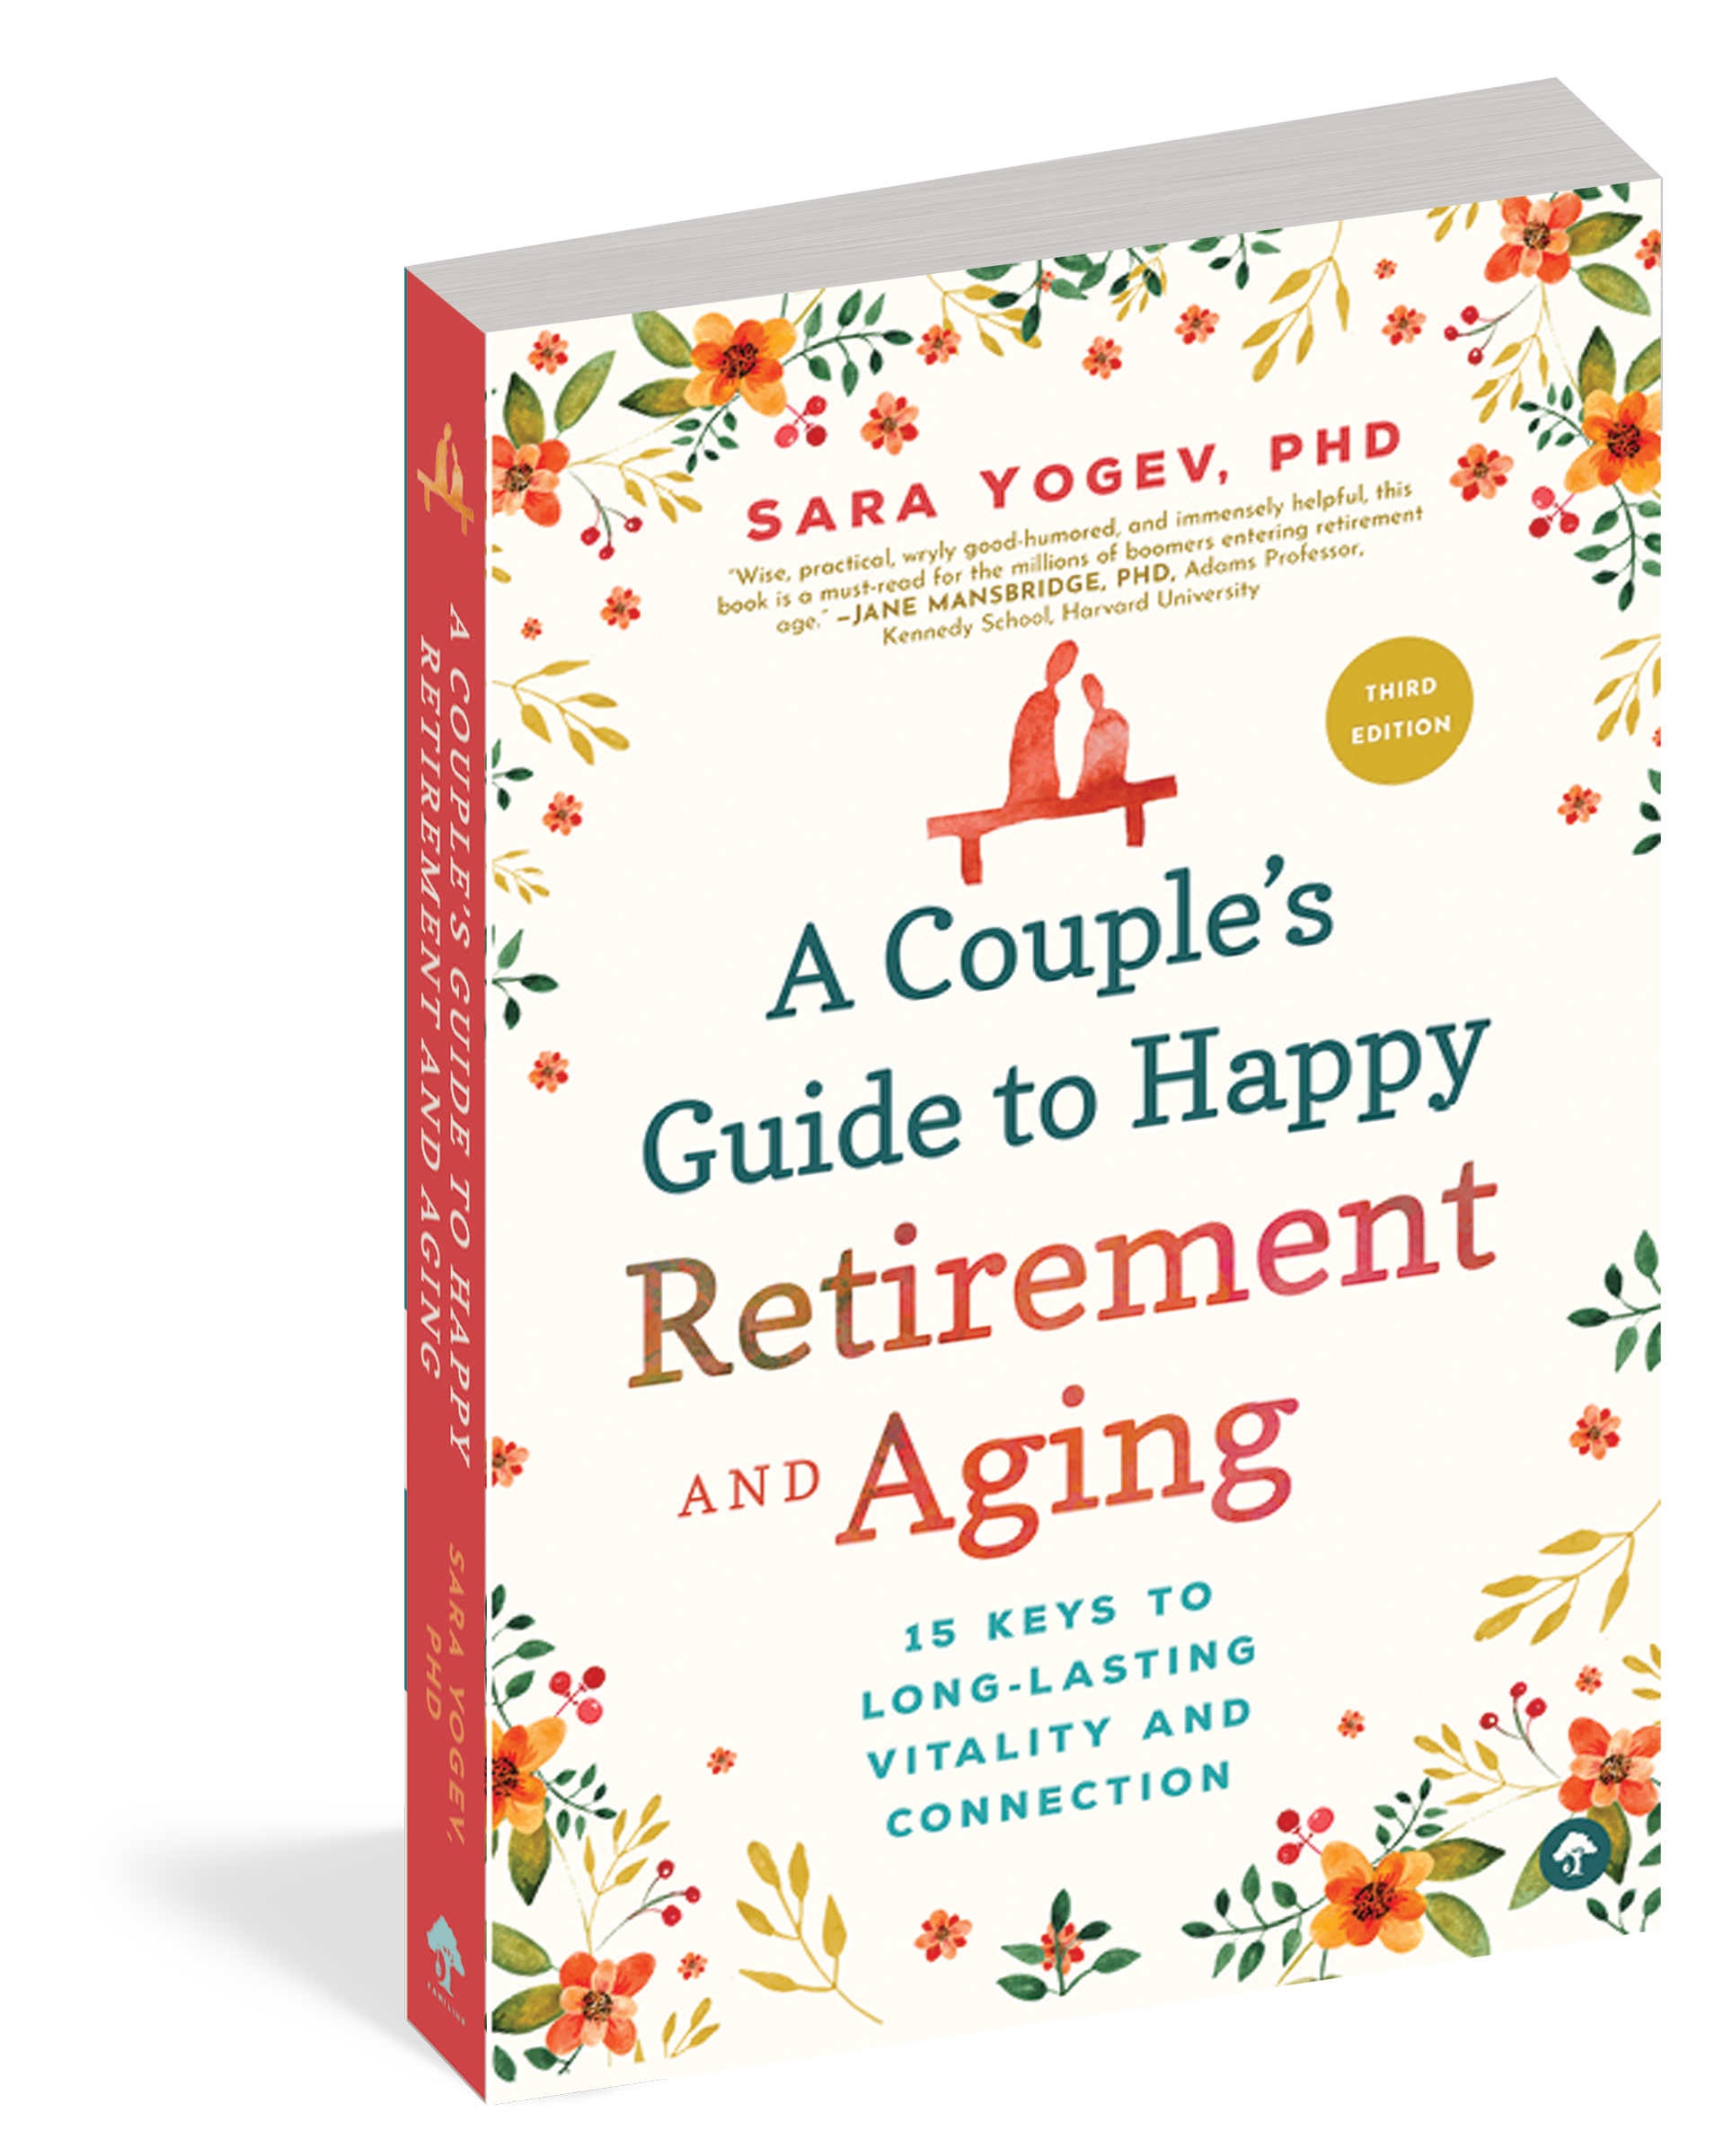 The cover of the book A Couple's Guide to Happy Retirement and Aging.